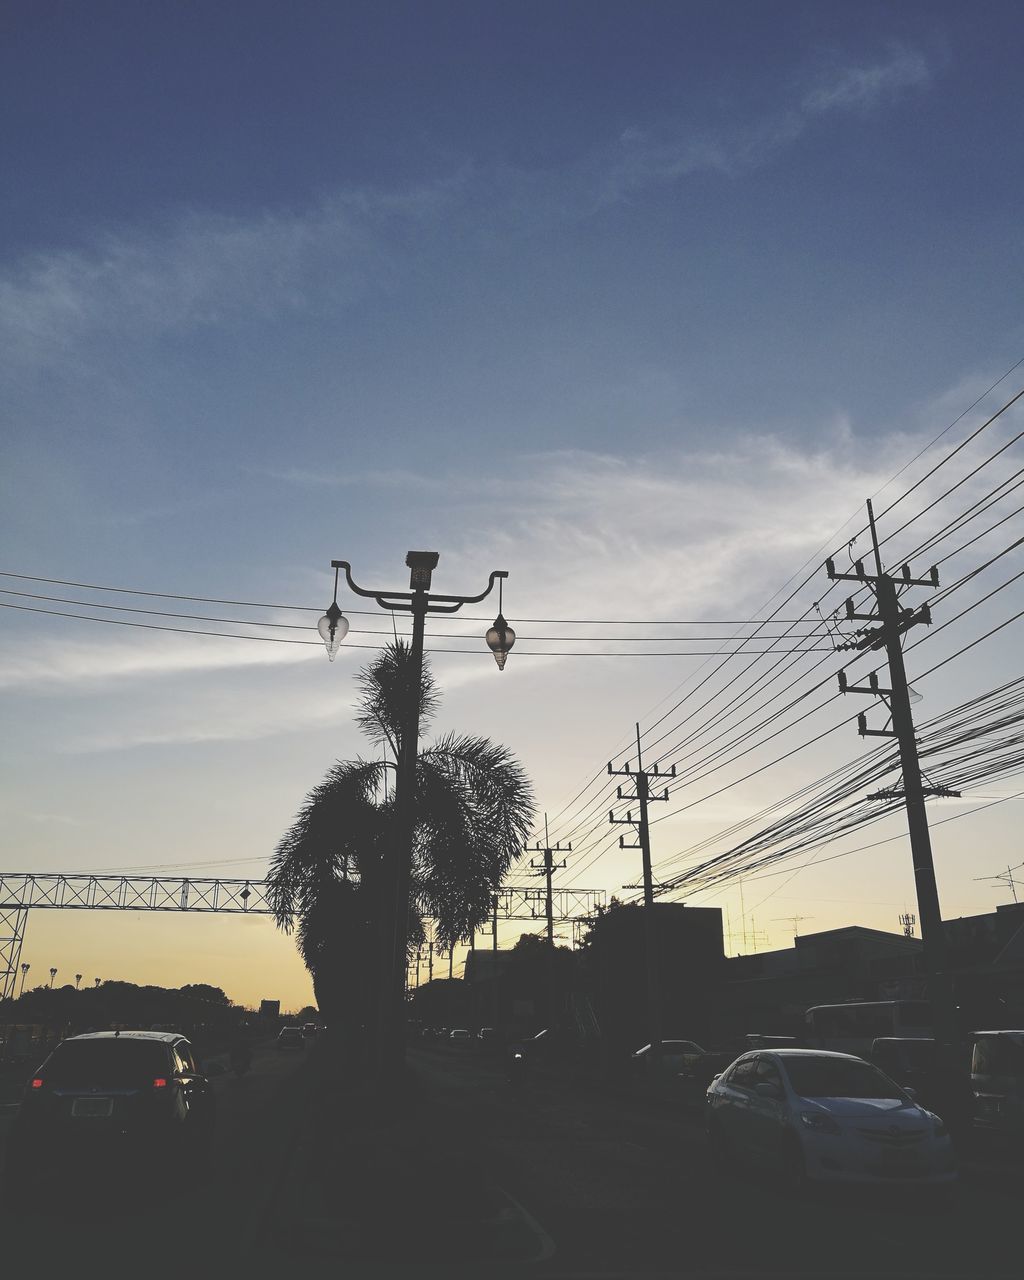 cable, car, sky, power line, transportation, electricity, electricity pylon, power supply, connection, silhouette, cloud - sky, land vehicle, tree, no people, fuel and power generation, outdoors, sunset, nature, telephone line, day, technology